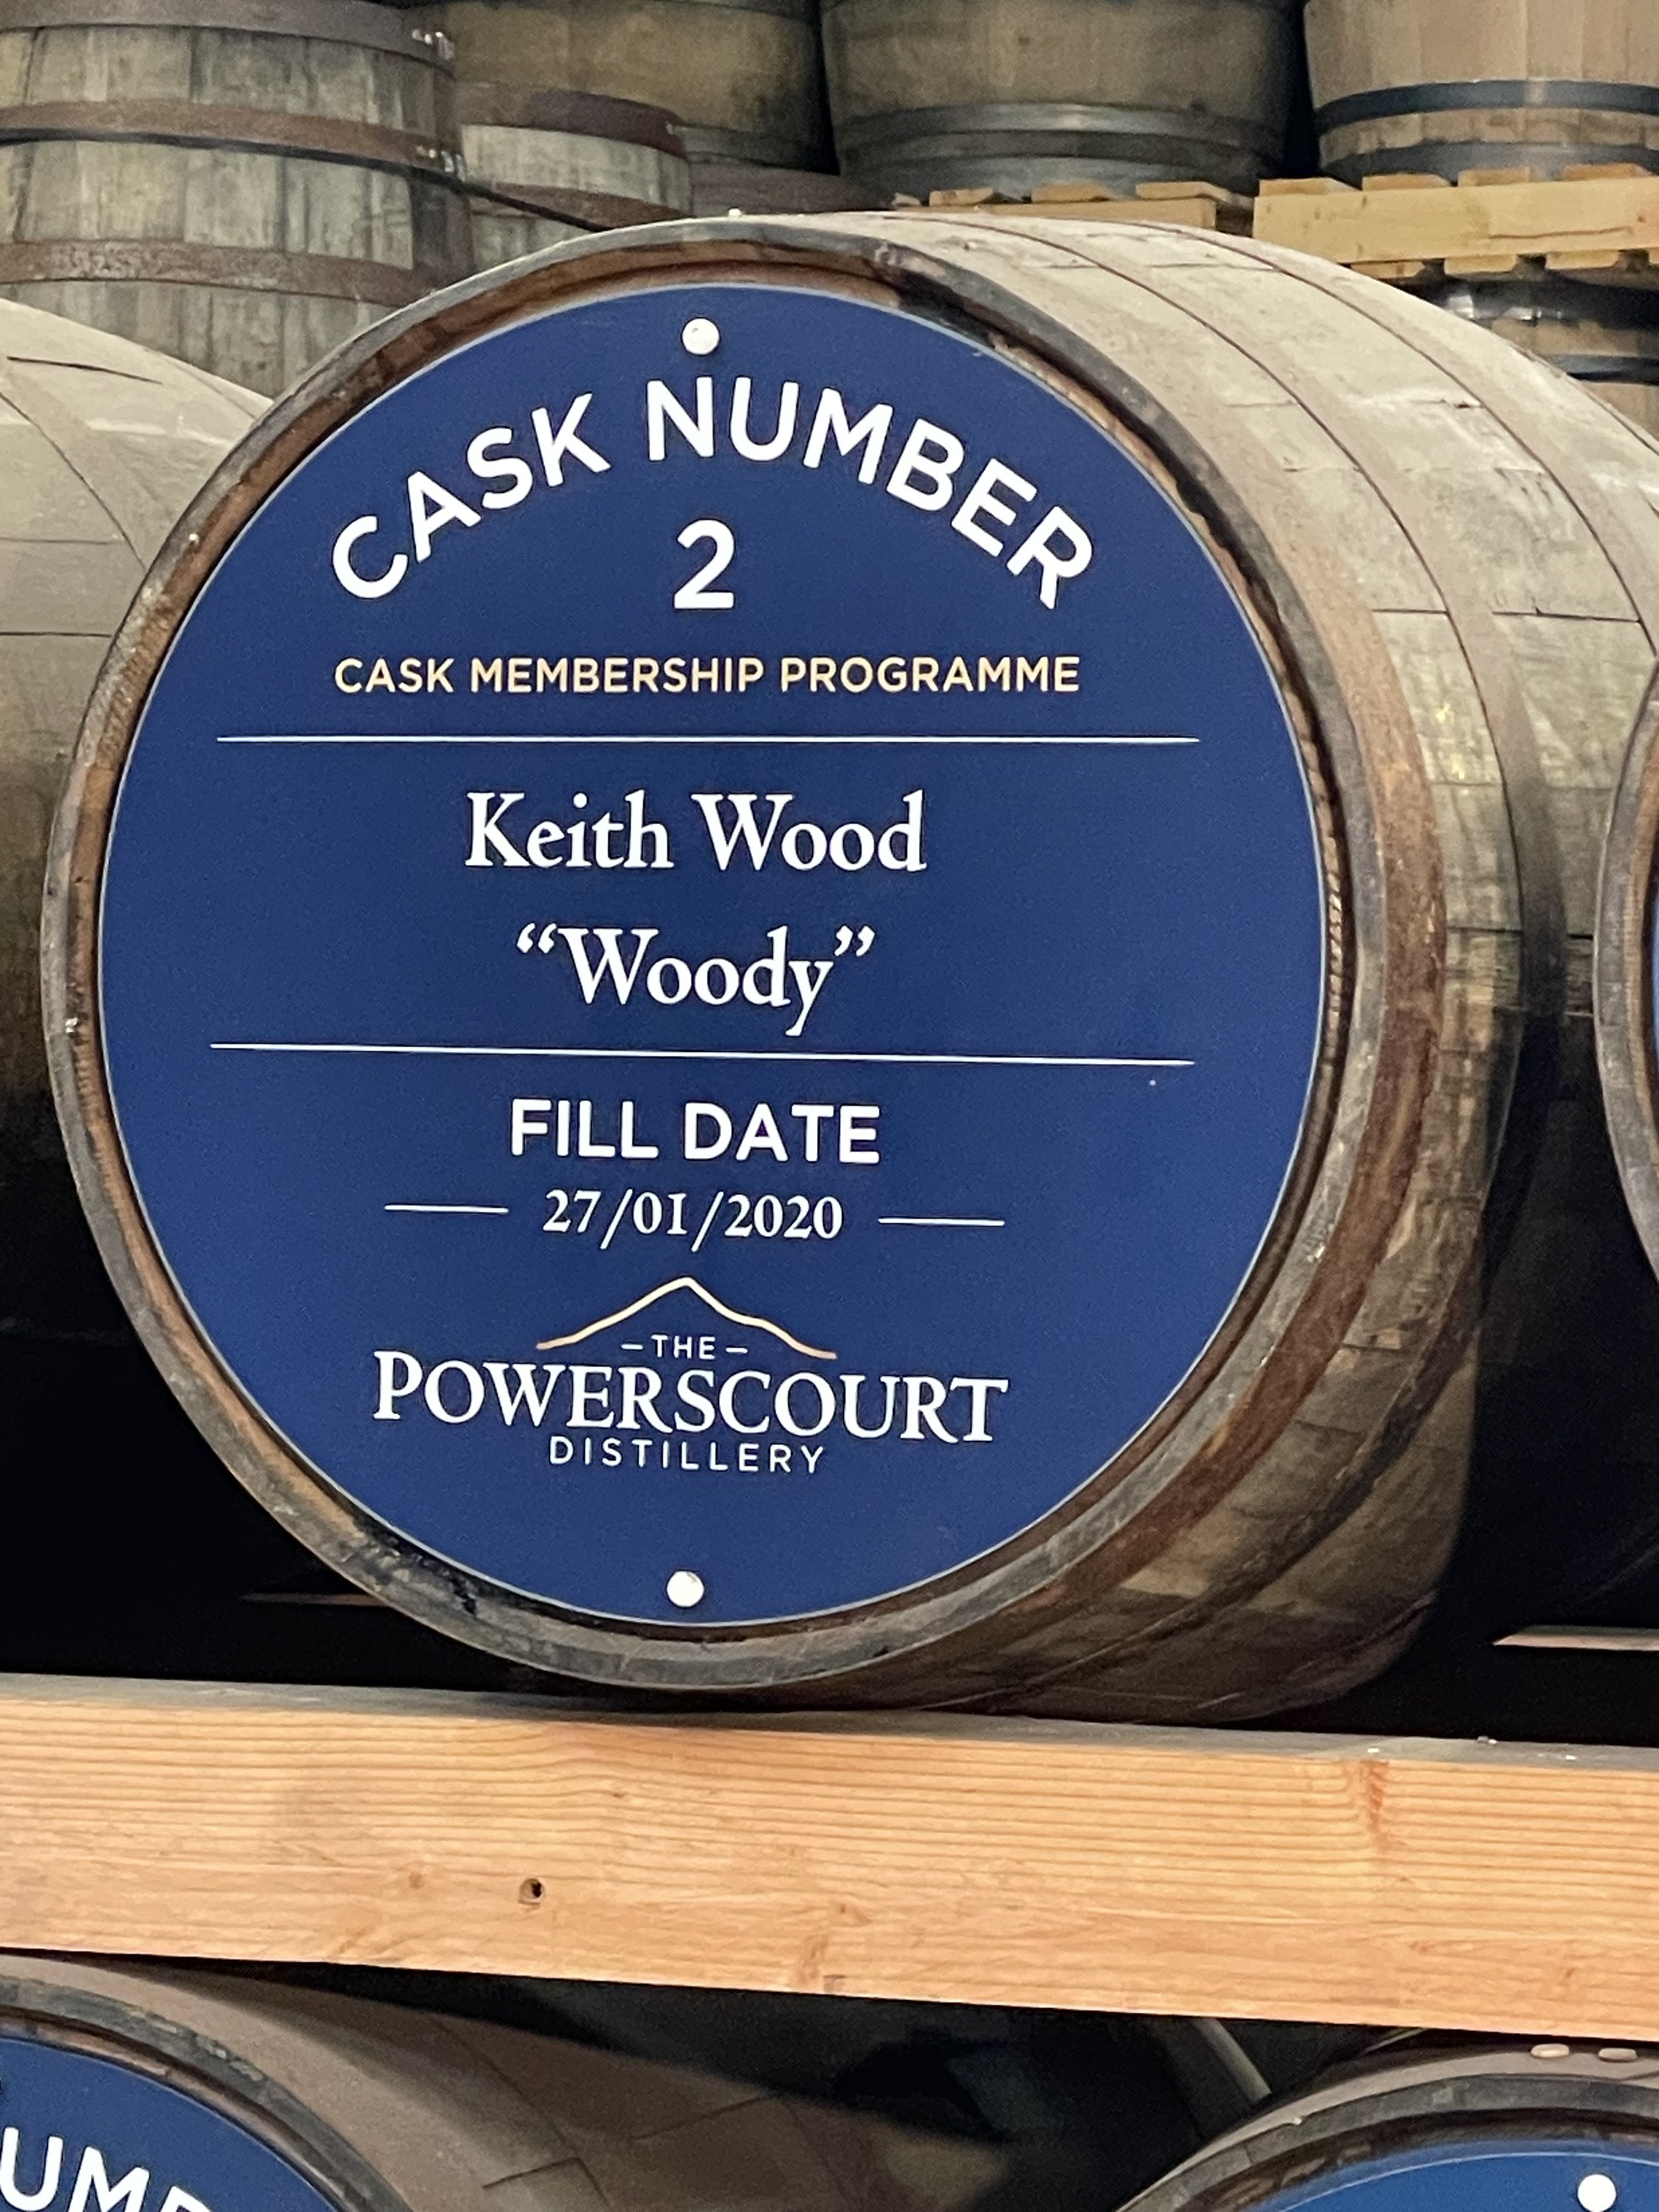 A famous rugby player has his own cask. 